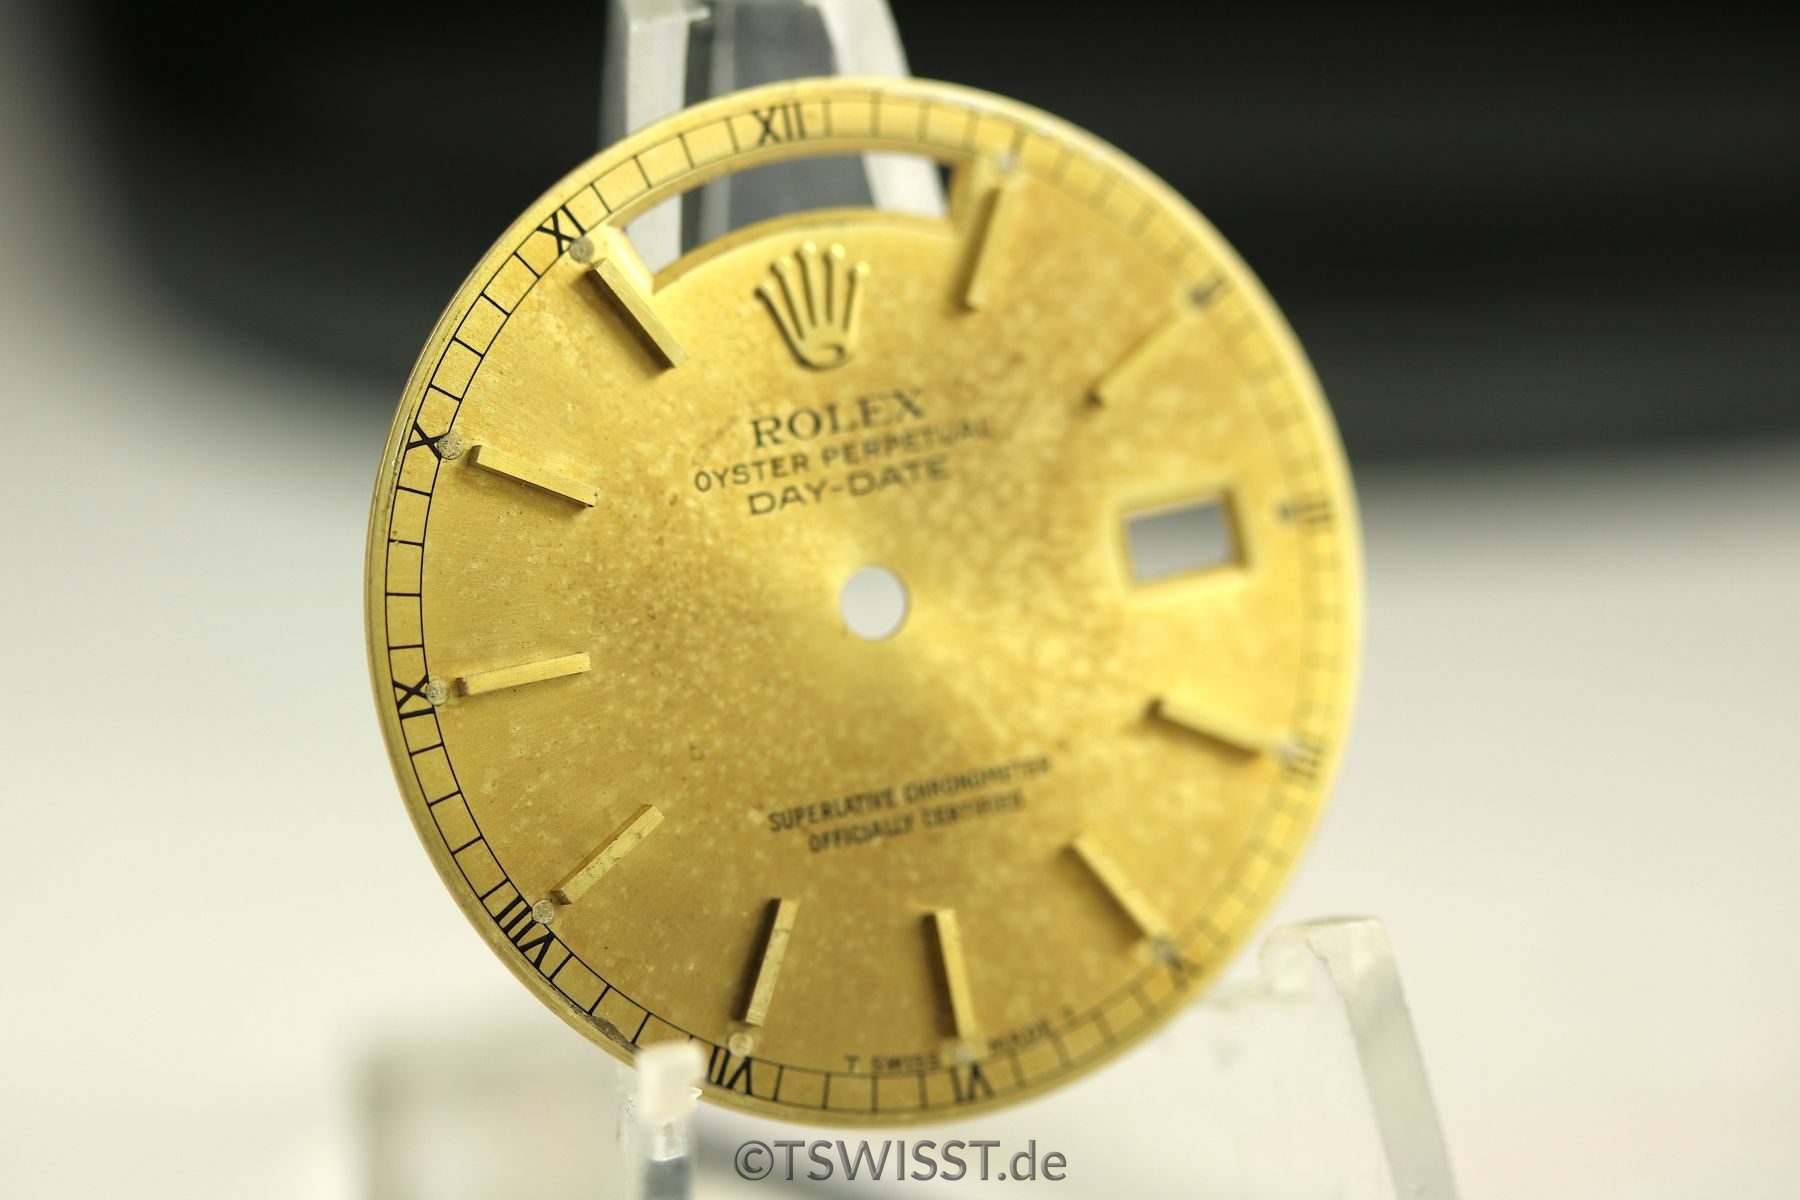 Rolex Day Date 180*8 dial